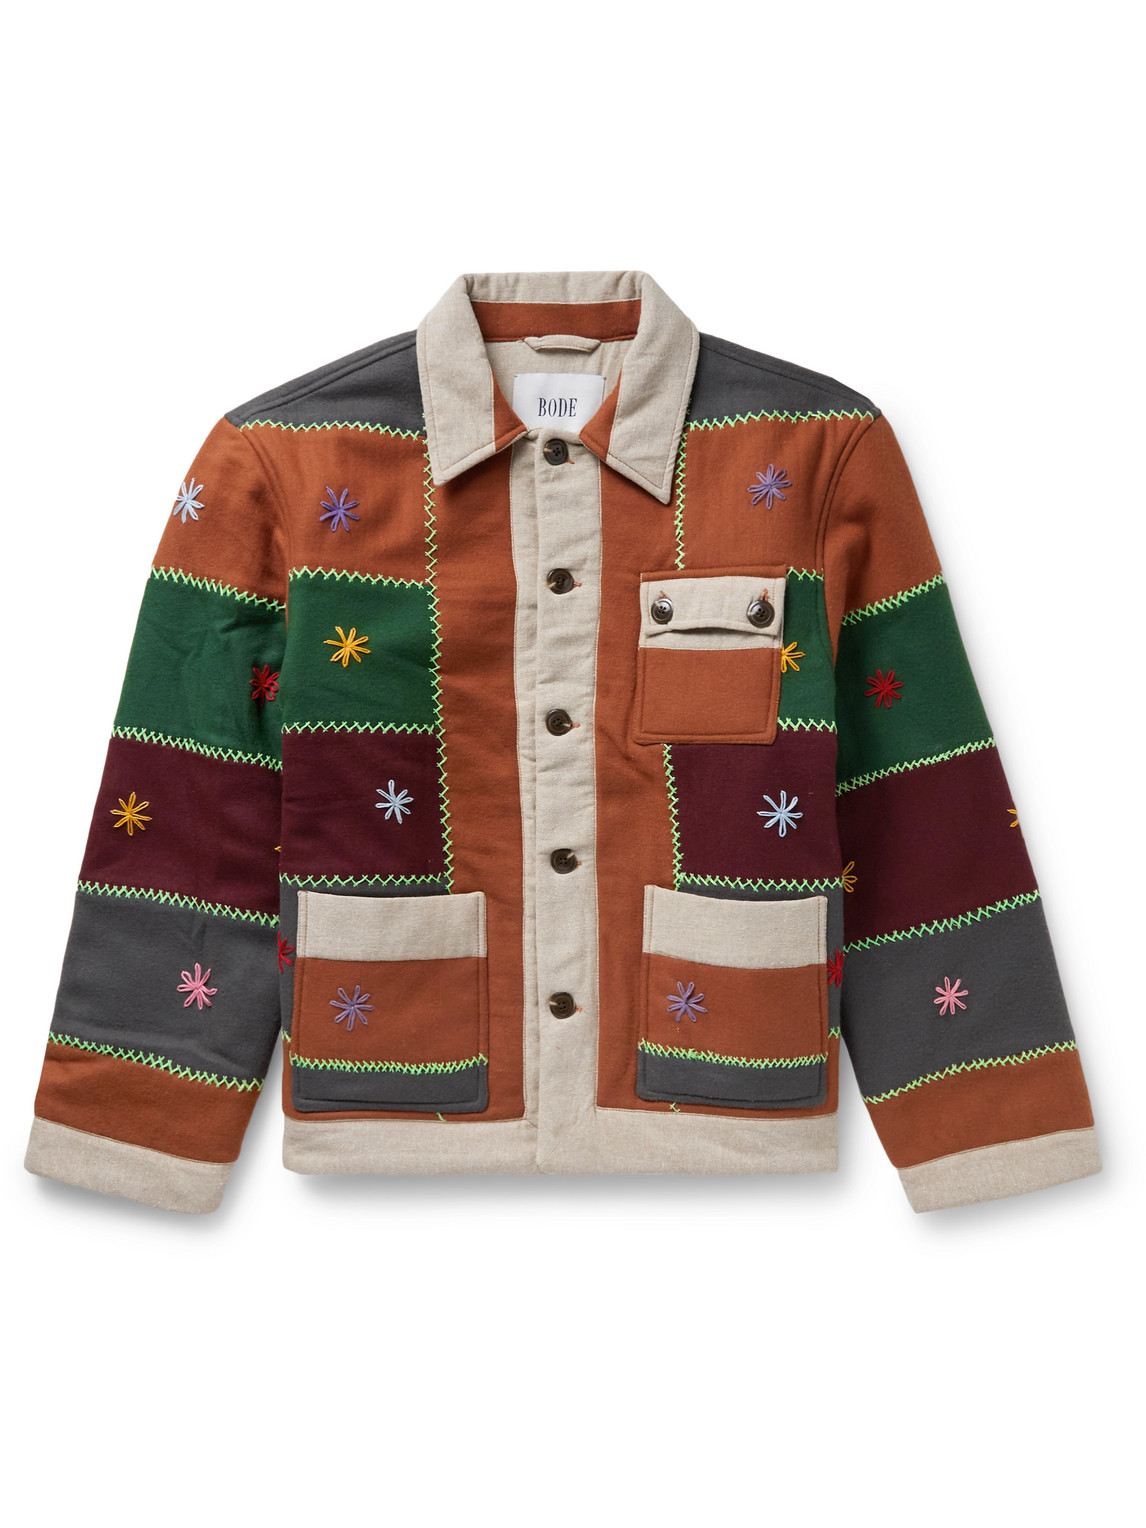 Embroidered Patchwork Wool-Blend Jacket